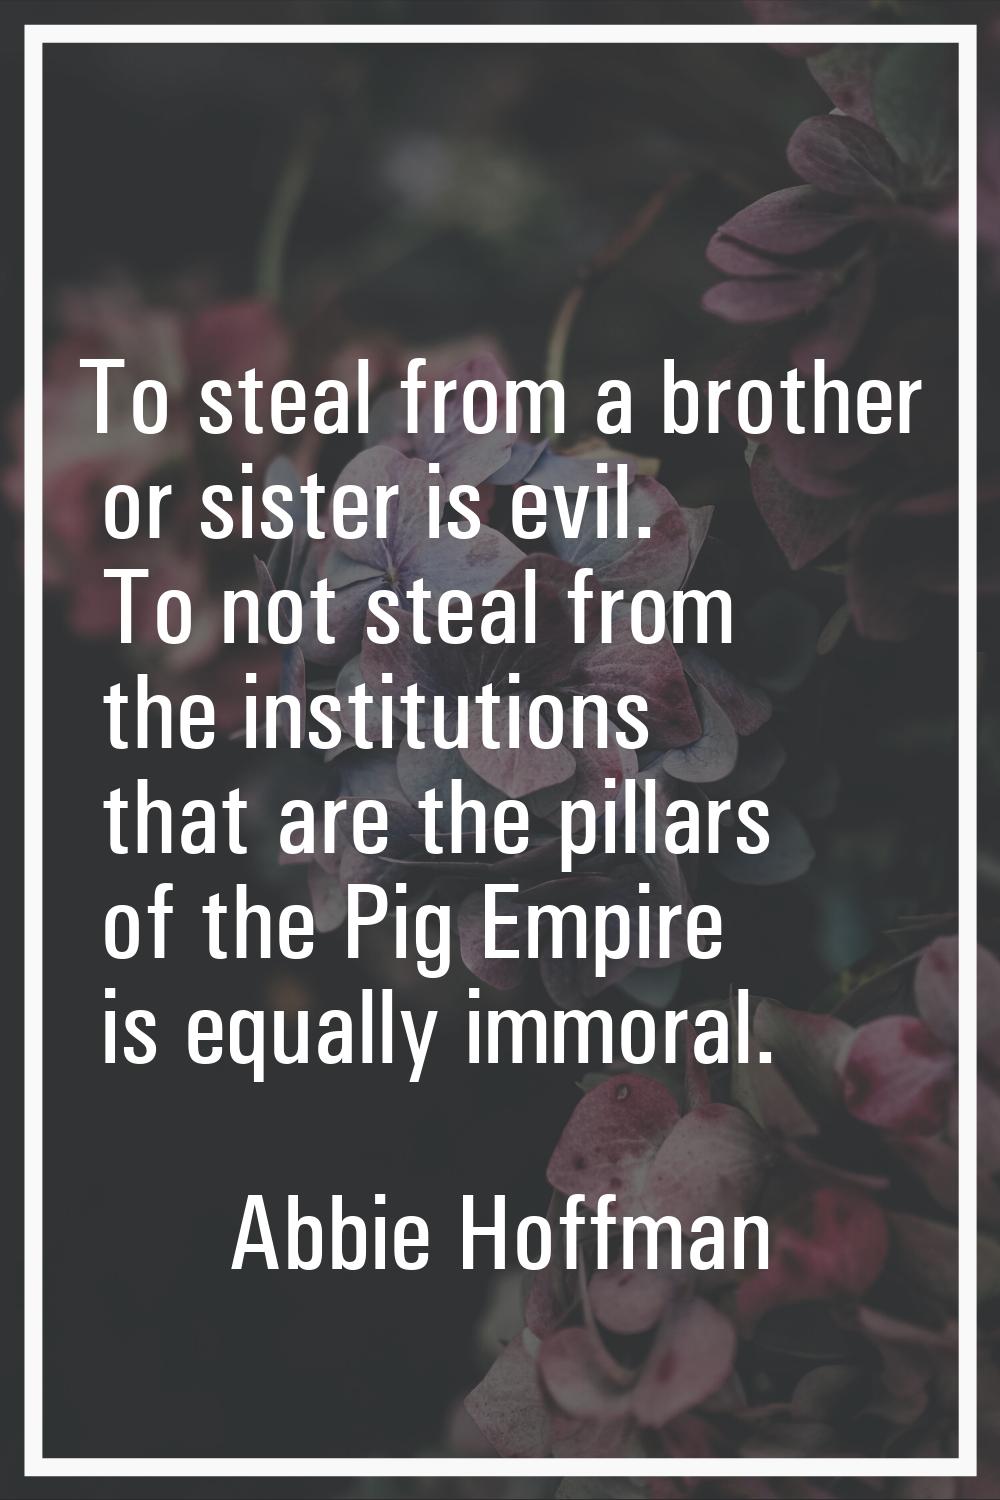 To steal from a brother or sister is evil. To not steal from the institutions that are the pillars 